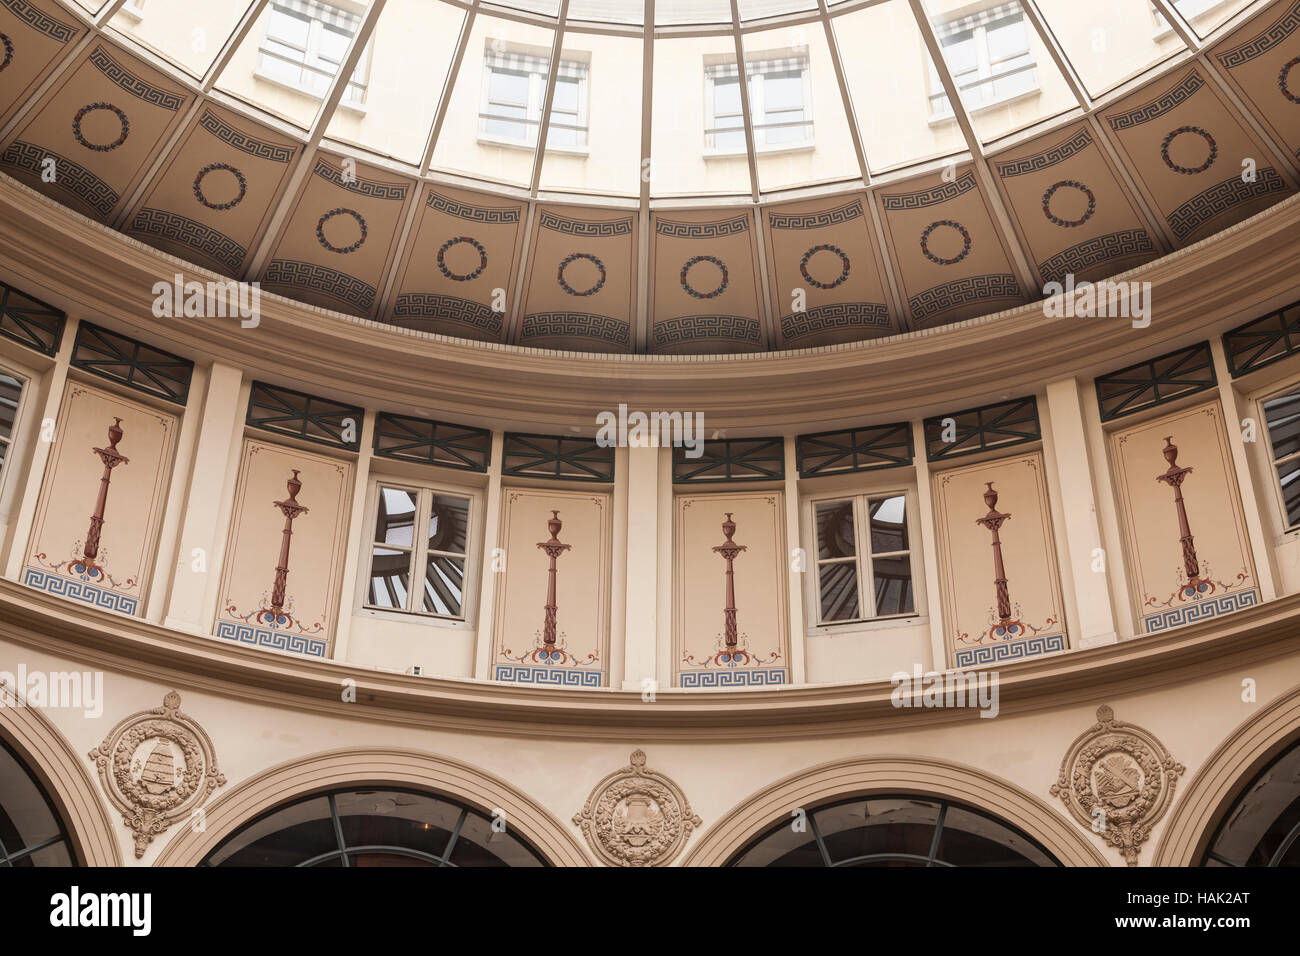 The glass dome in Galerie Colbert, Paris. Stock Photo